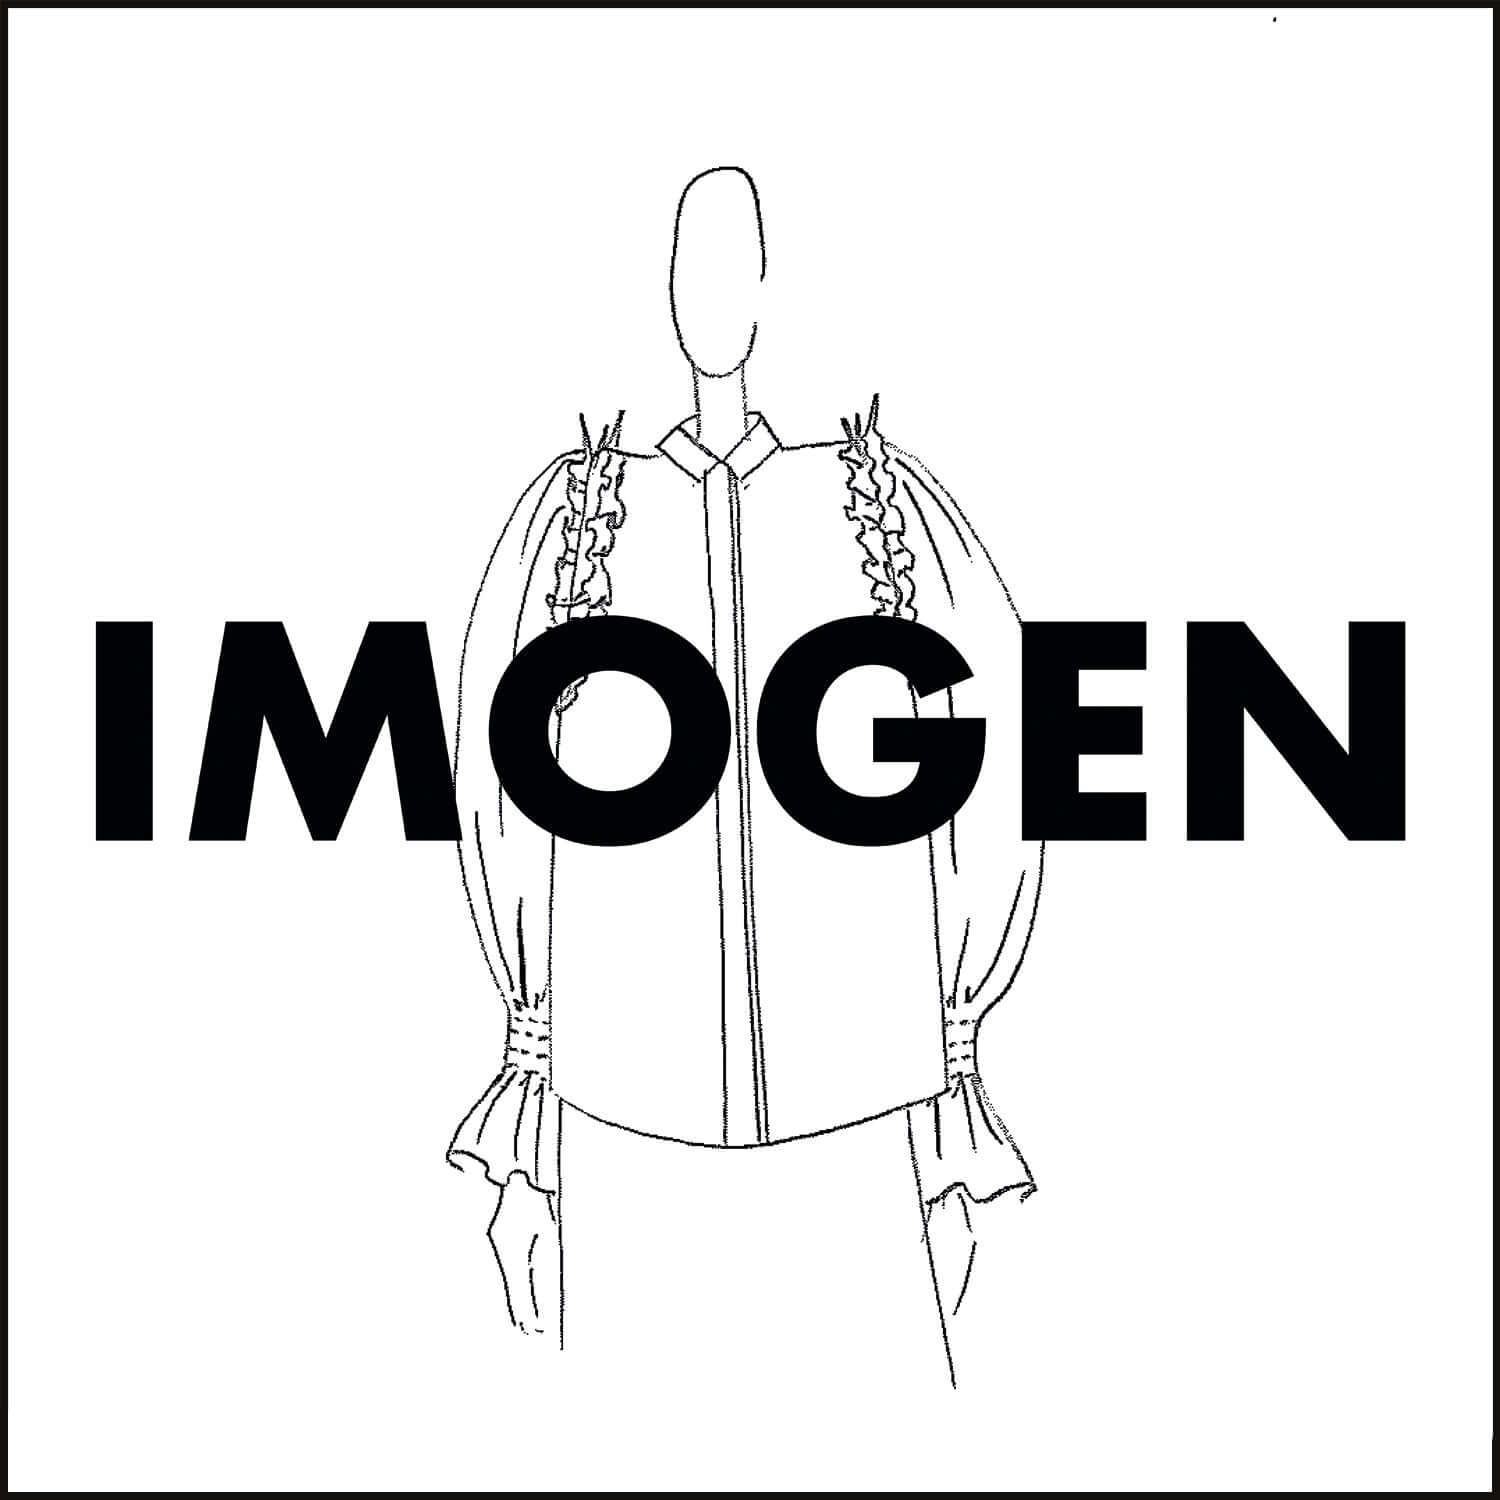 Learn more about... the Imogen shirt